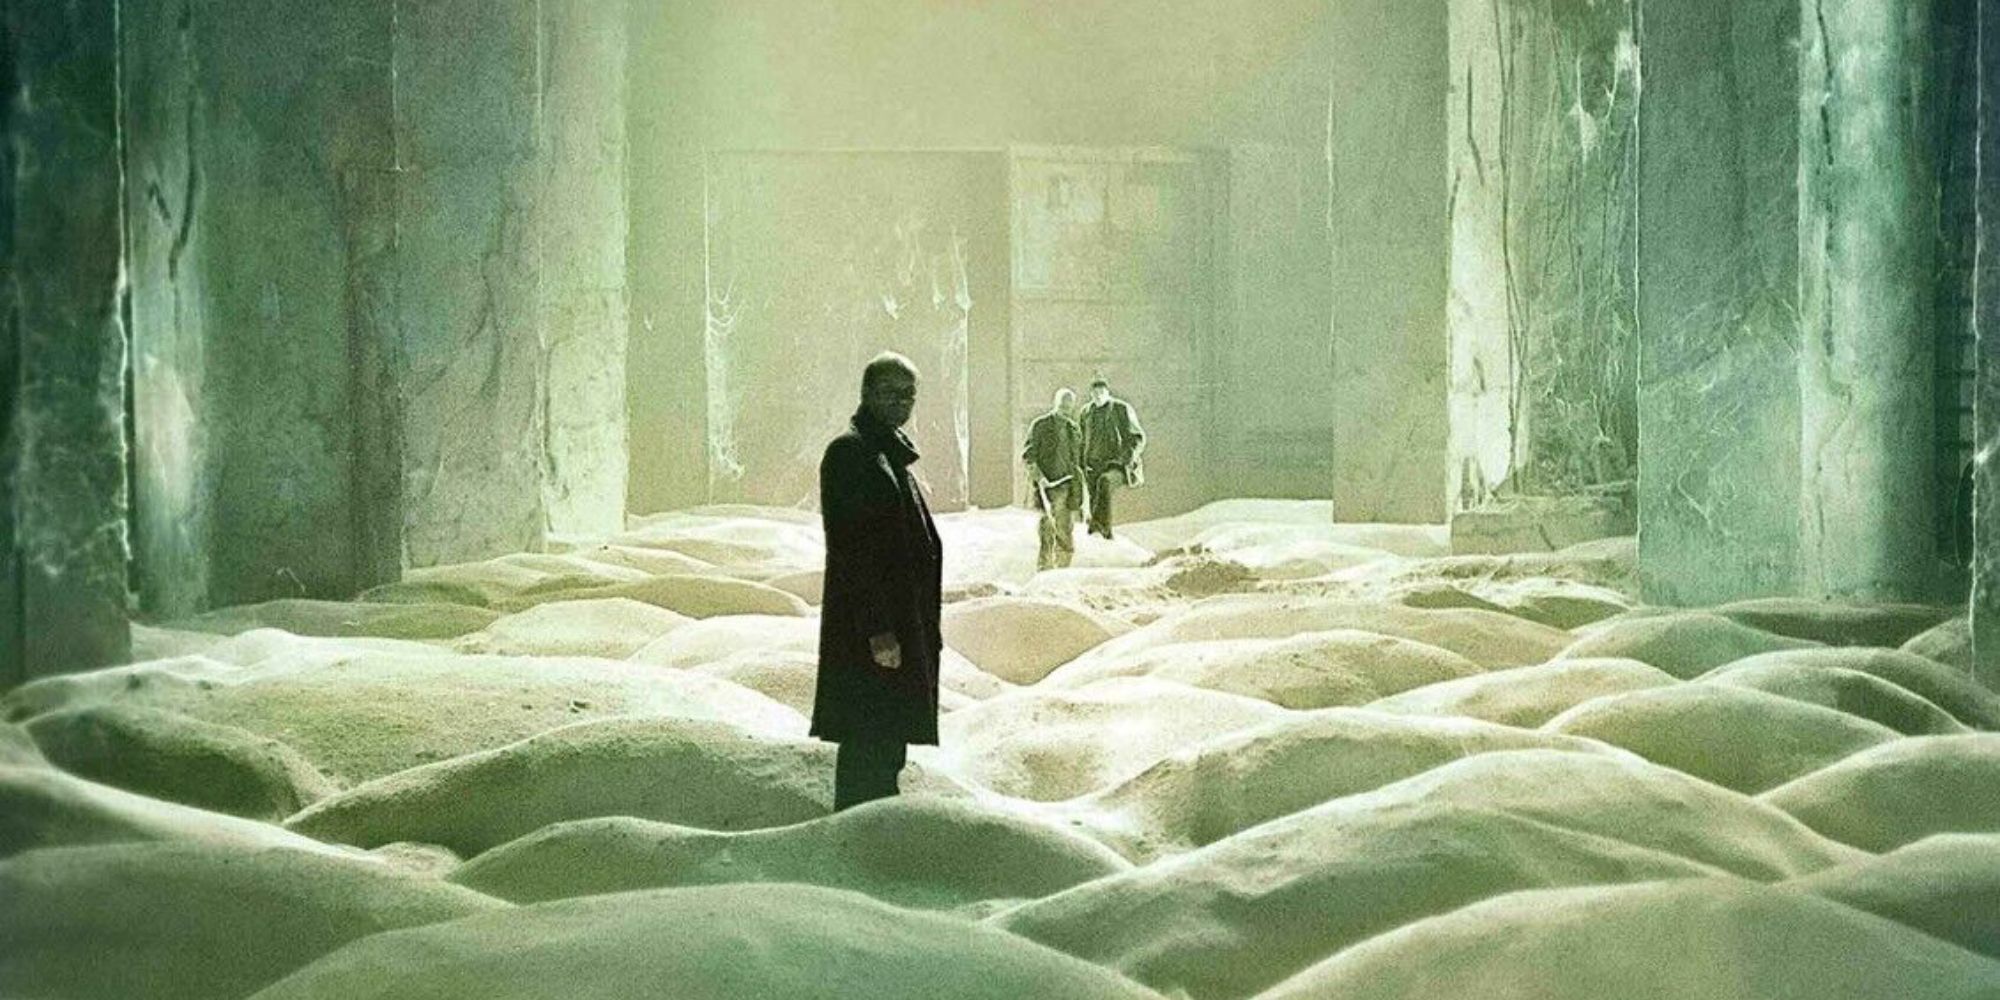 A man standing on a cloud-like surface in Stalker - 1979